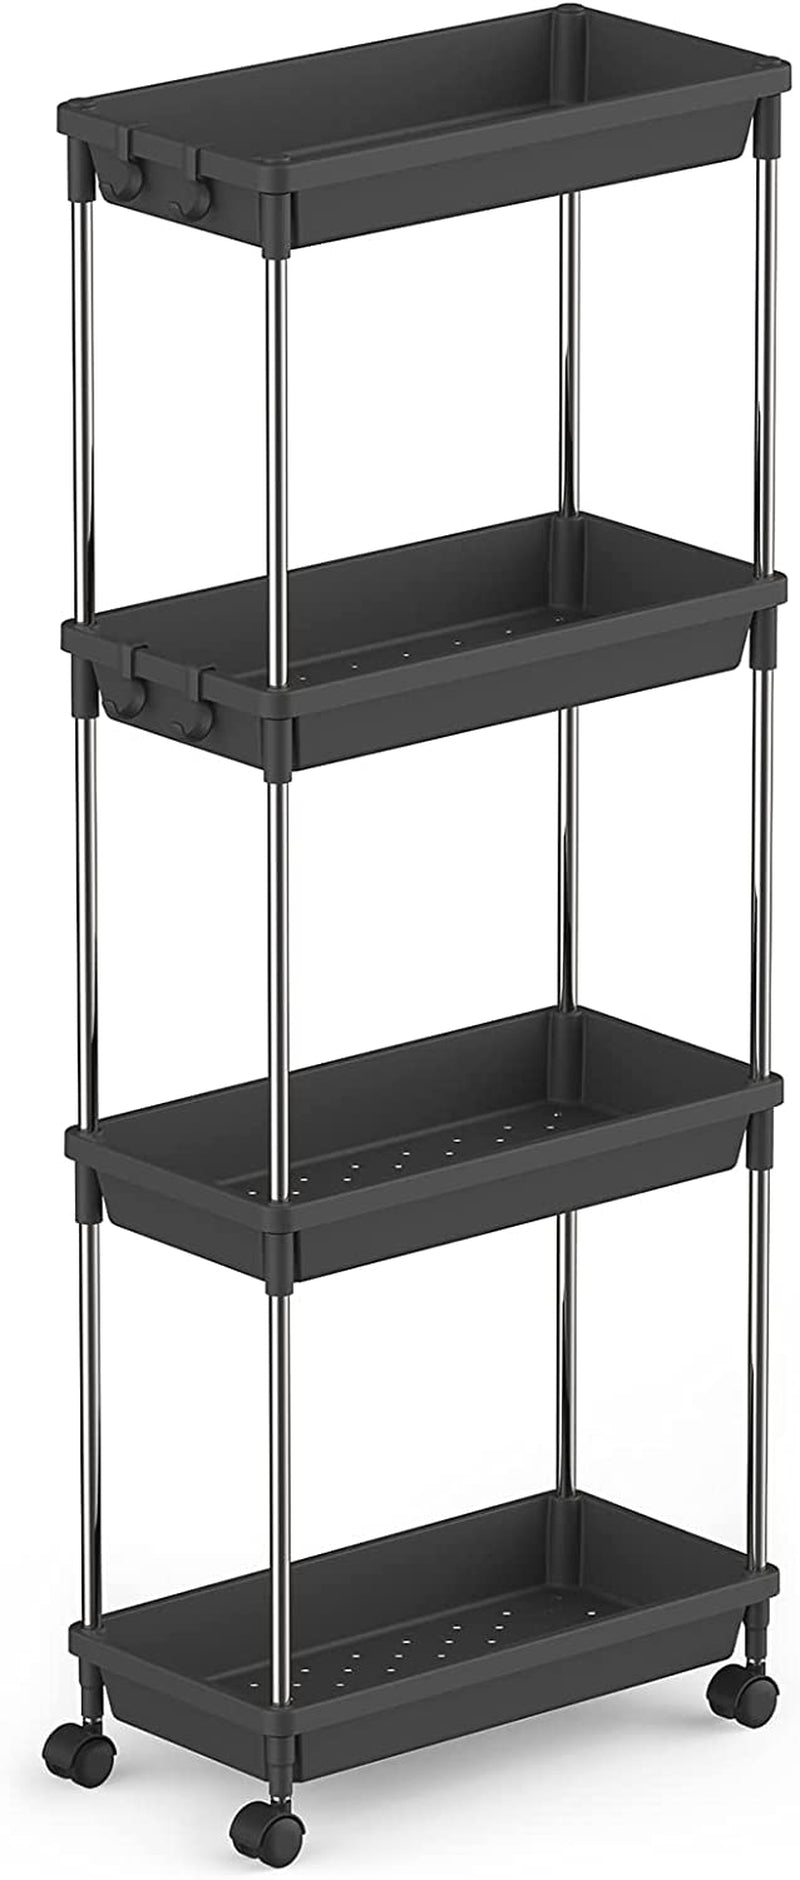 Lifewit Slim Storage Rolling Cart for Gap Narrow Space, 4 Tier Slide-Out Trolley Utility Rack Shelf Organizer with Wheels for Bathroom Kitchen Laundryroom Bedroom, Space-Saving Easy Assembly, White Home & Garden > Household Supplies > Storage & Organization Lifewit Black 15.4" x 7.9" x 39.3" 